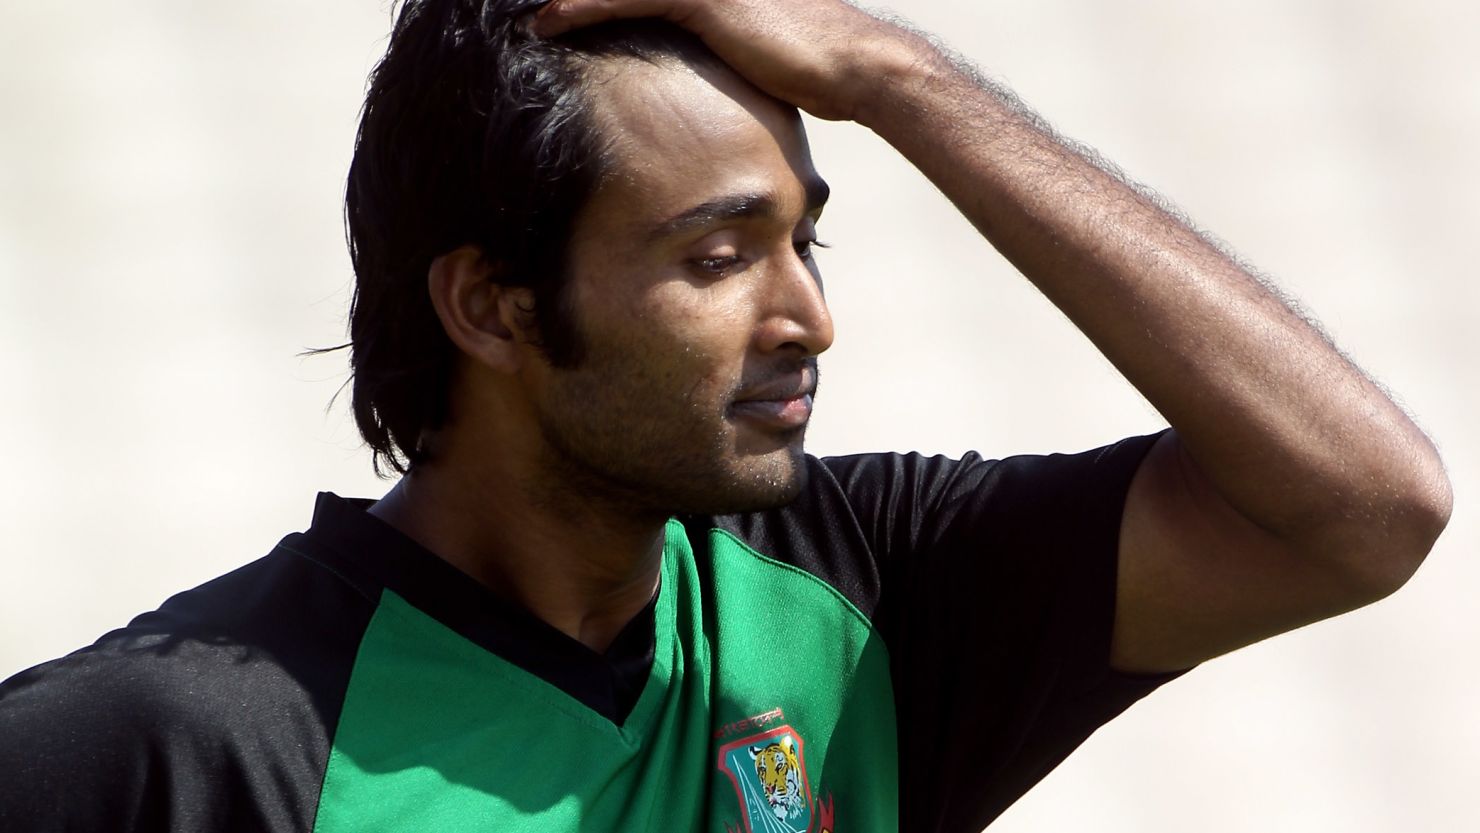 Shahadat Hossain pictured training at Old Trafford on June 3, 2010 in Manchester, England.